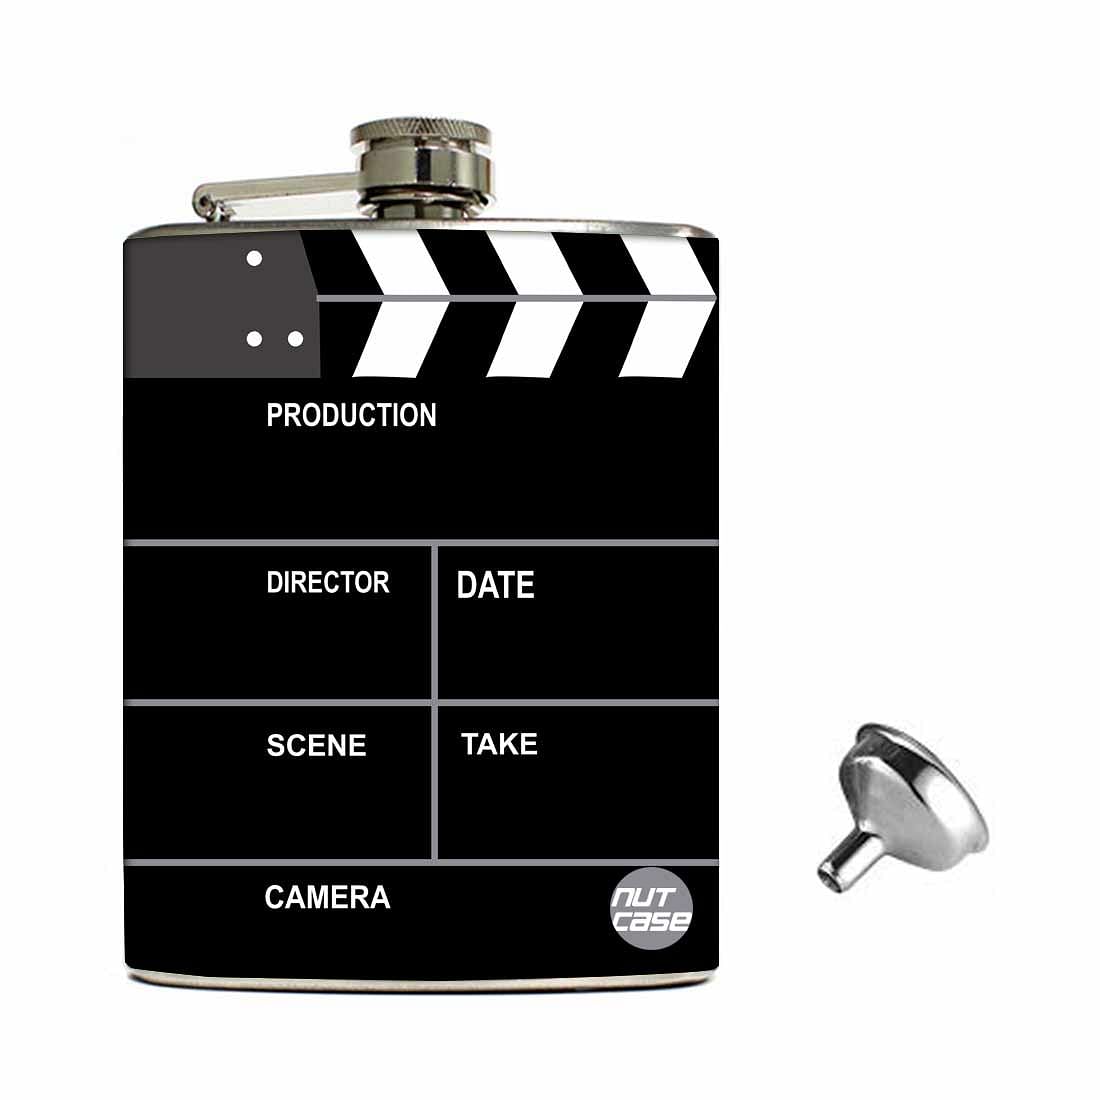 Funny Hipflask Gift Box -Flimy Movie Clapboard Design Nutcase